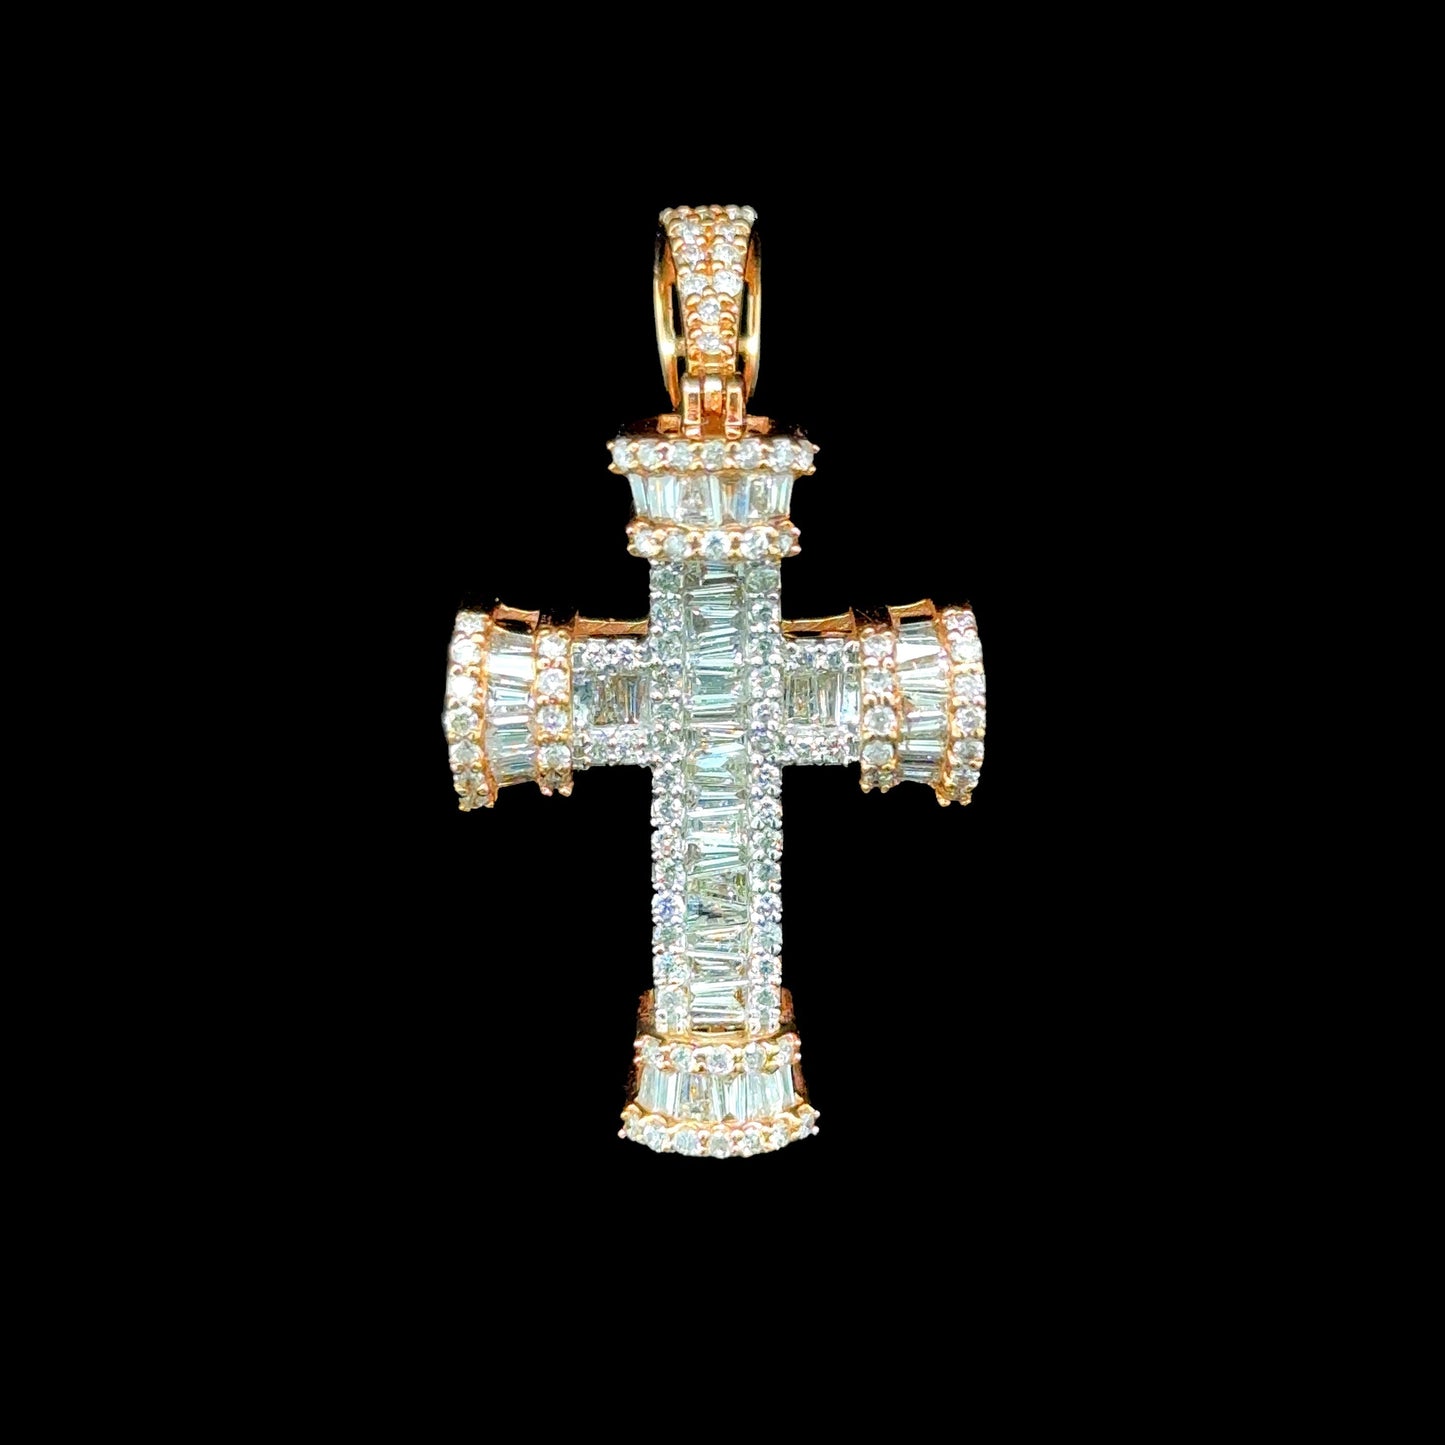 Rose gold cross pendant adorned with 1.72 carats of sparkling diamonds.